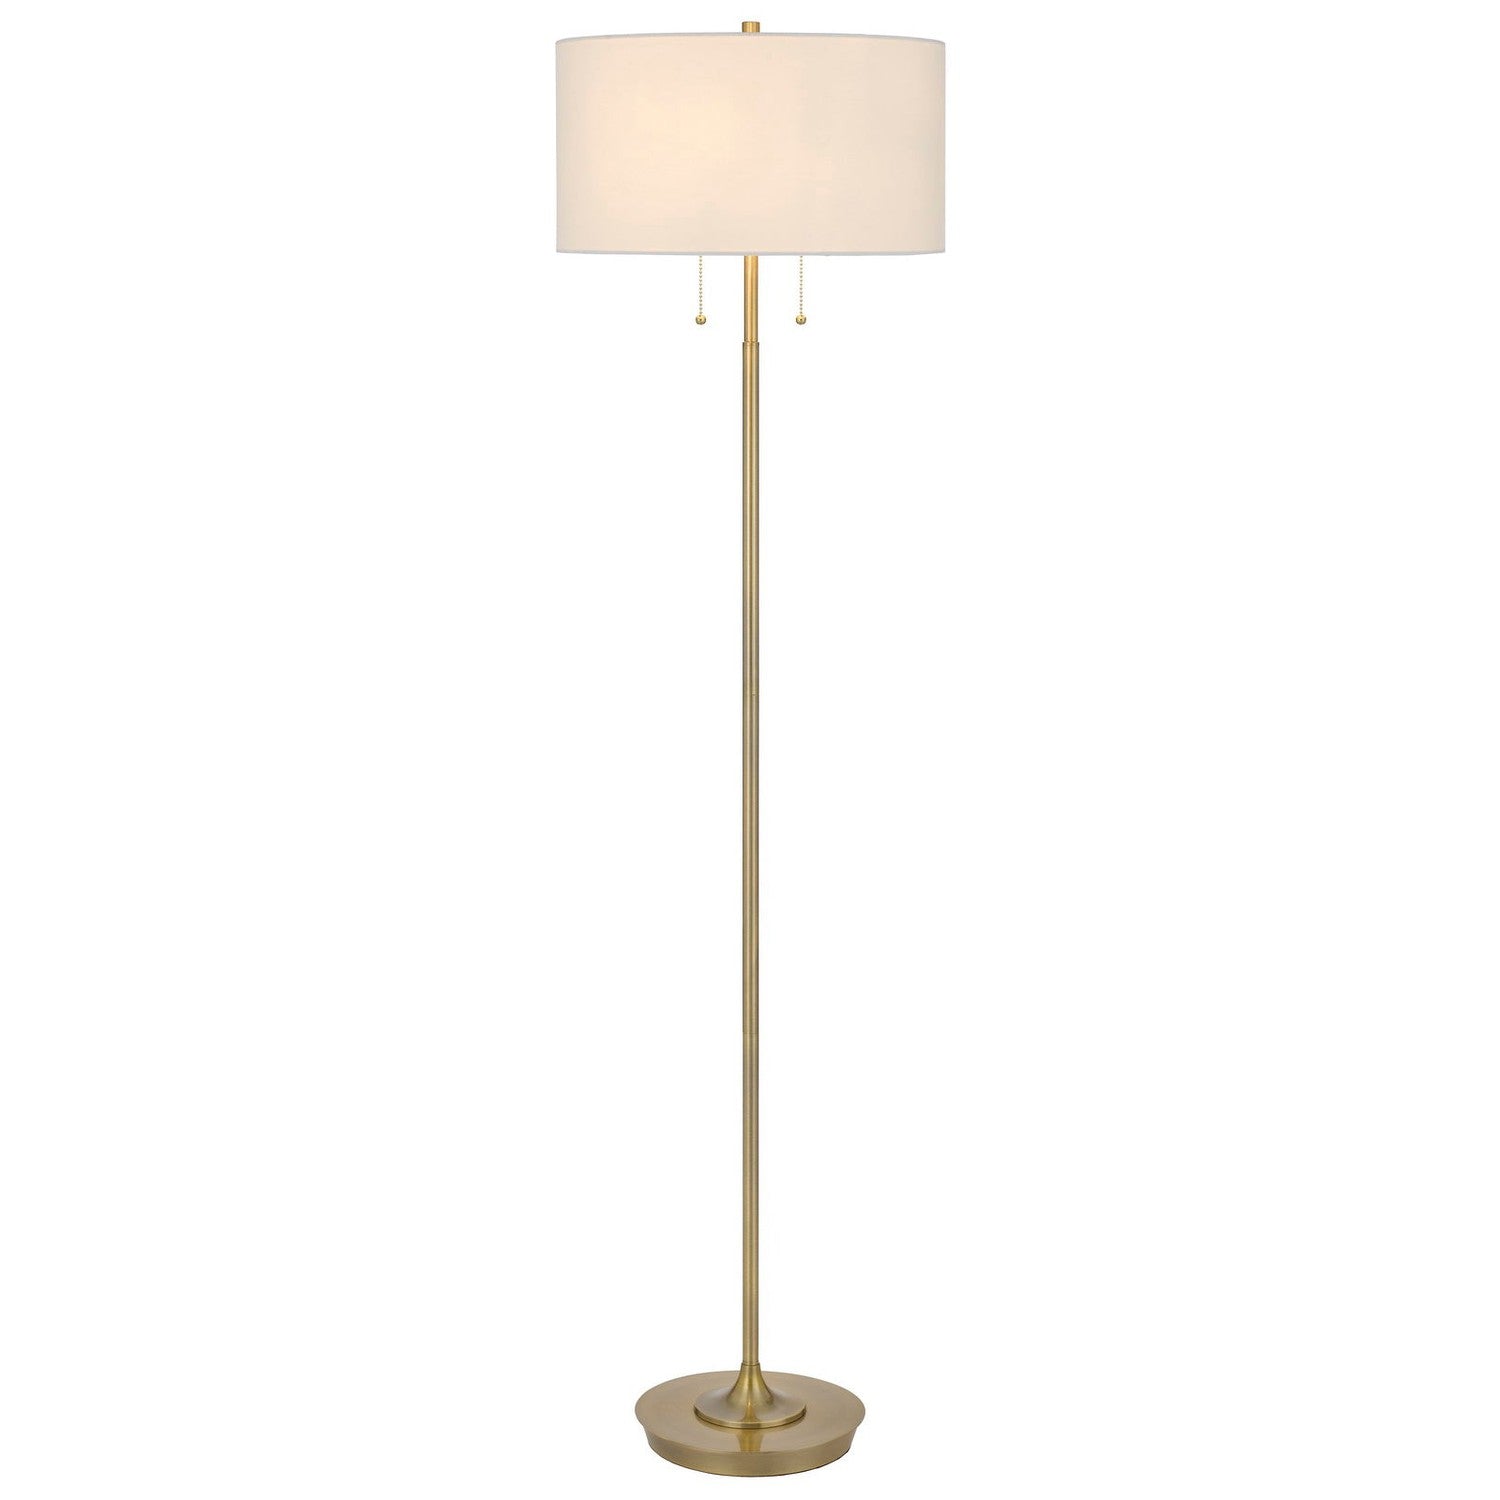 Kendal metal floor lamp with pull chain switch, drum fabric shade-Cal Lighting-CAL-BO-3028FL-Floor Lamps-2-France and Son